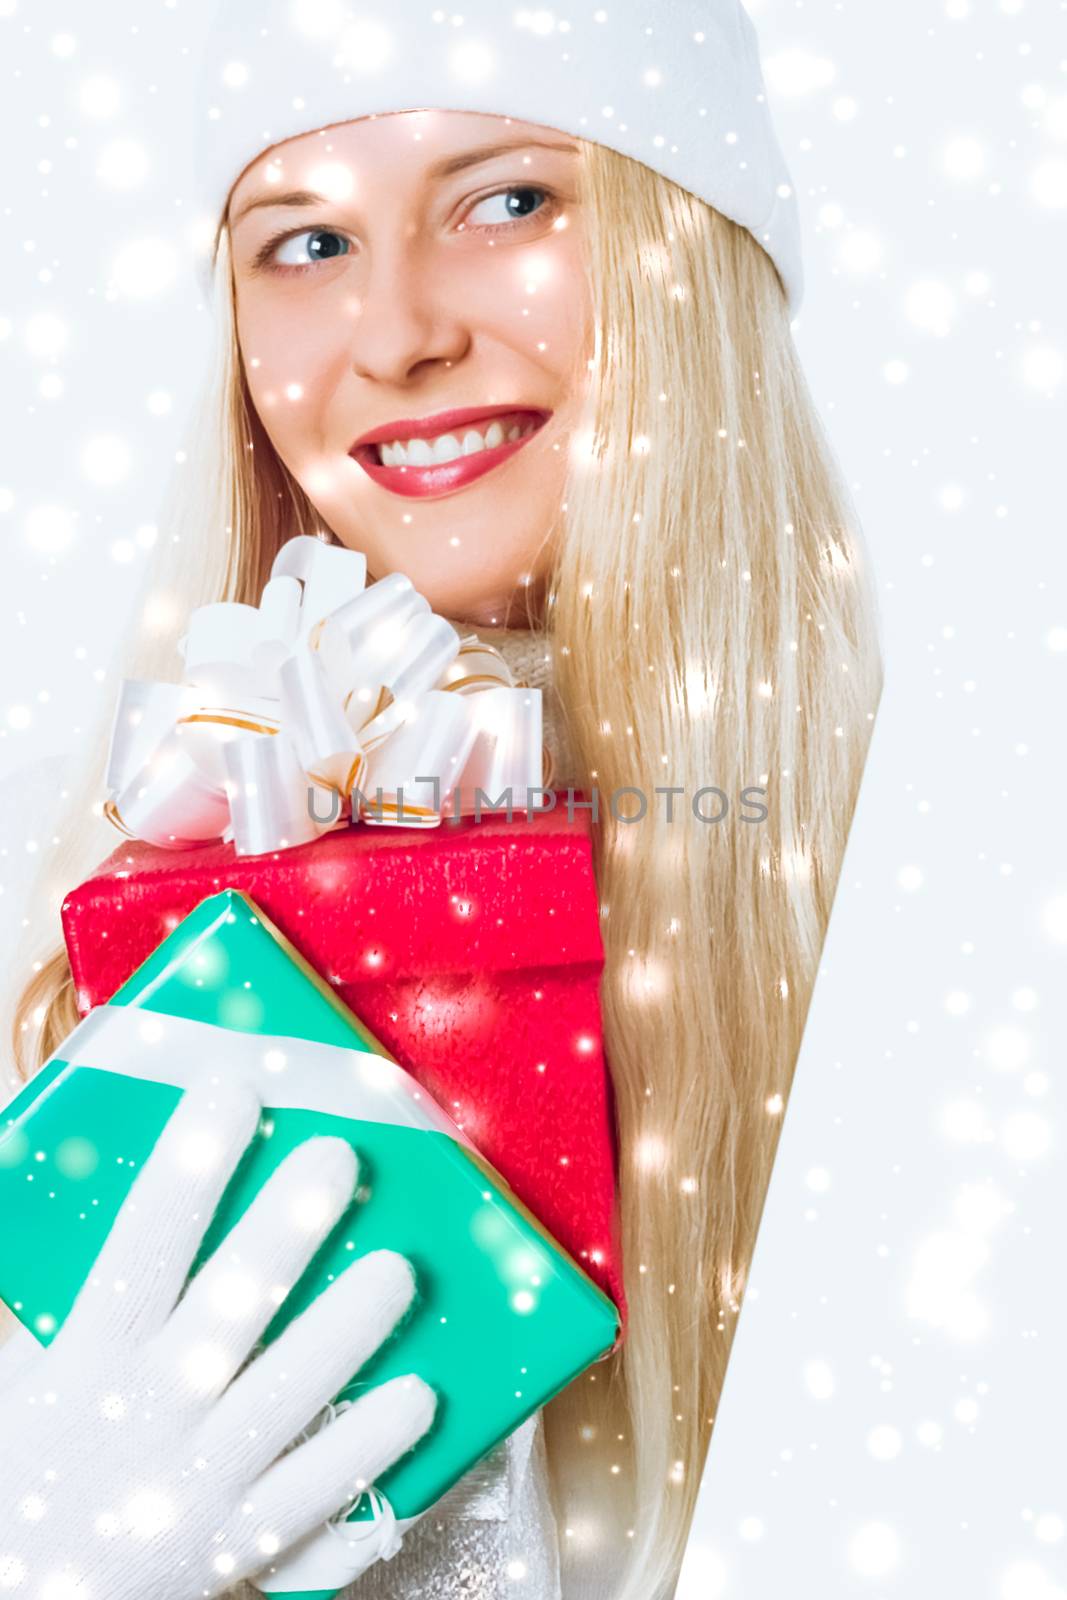 Magical Christmas and glitter snow background, happy blonde with gift boxes in winter season for shopping sale and holiday brands